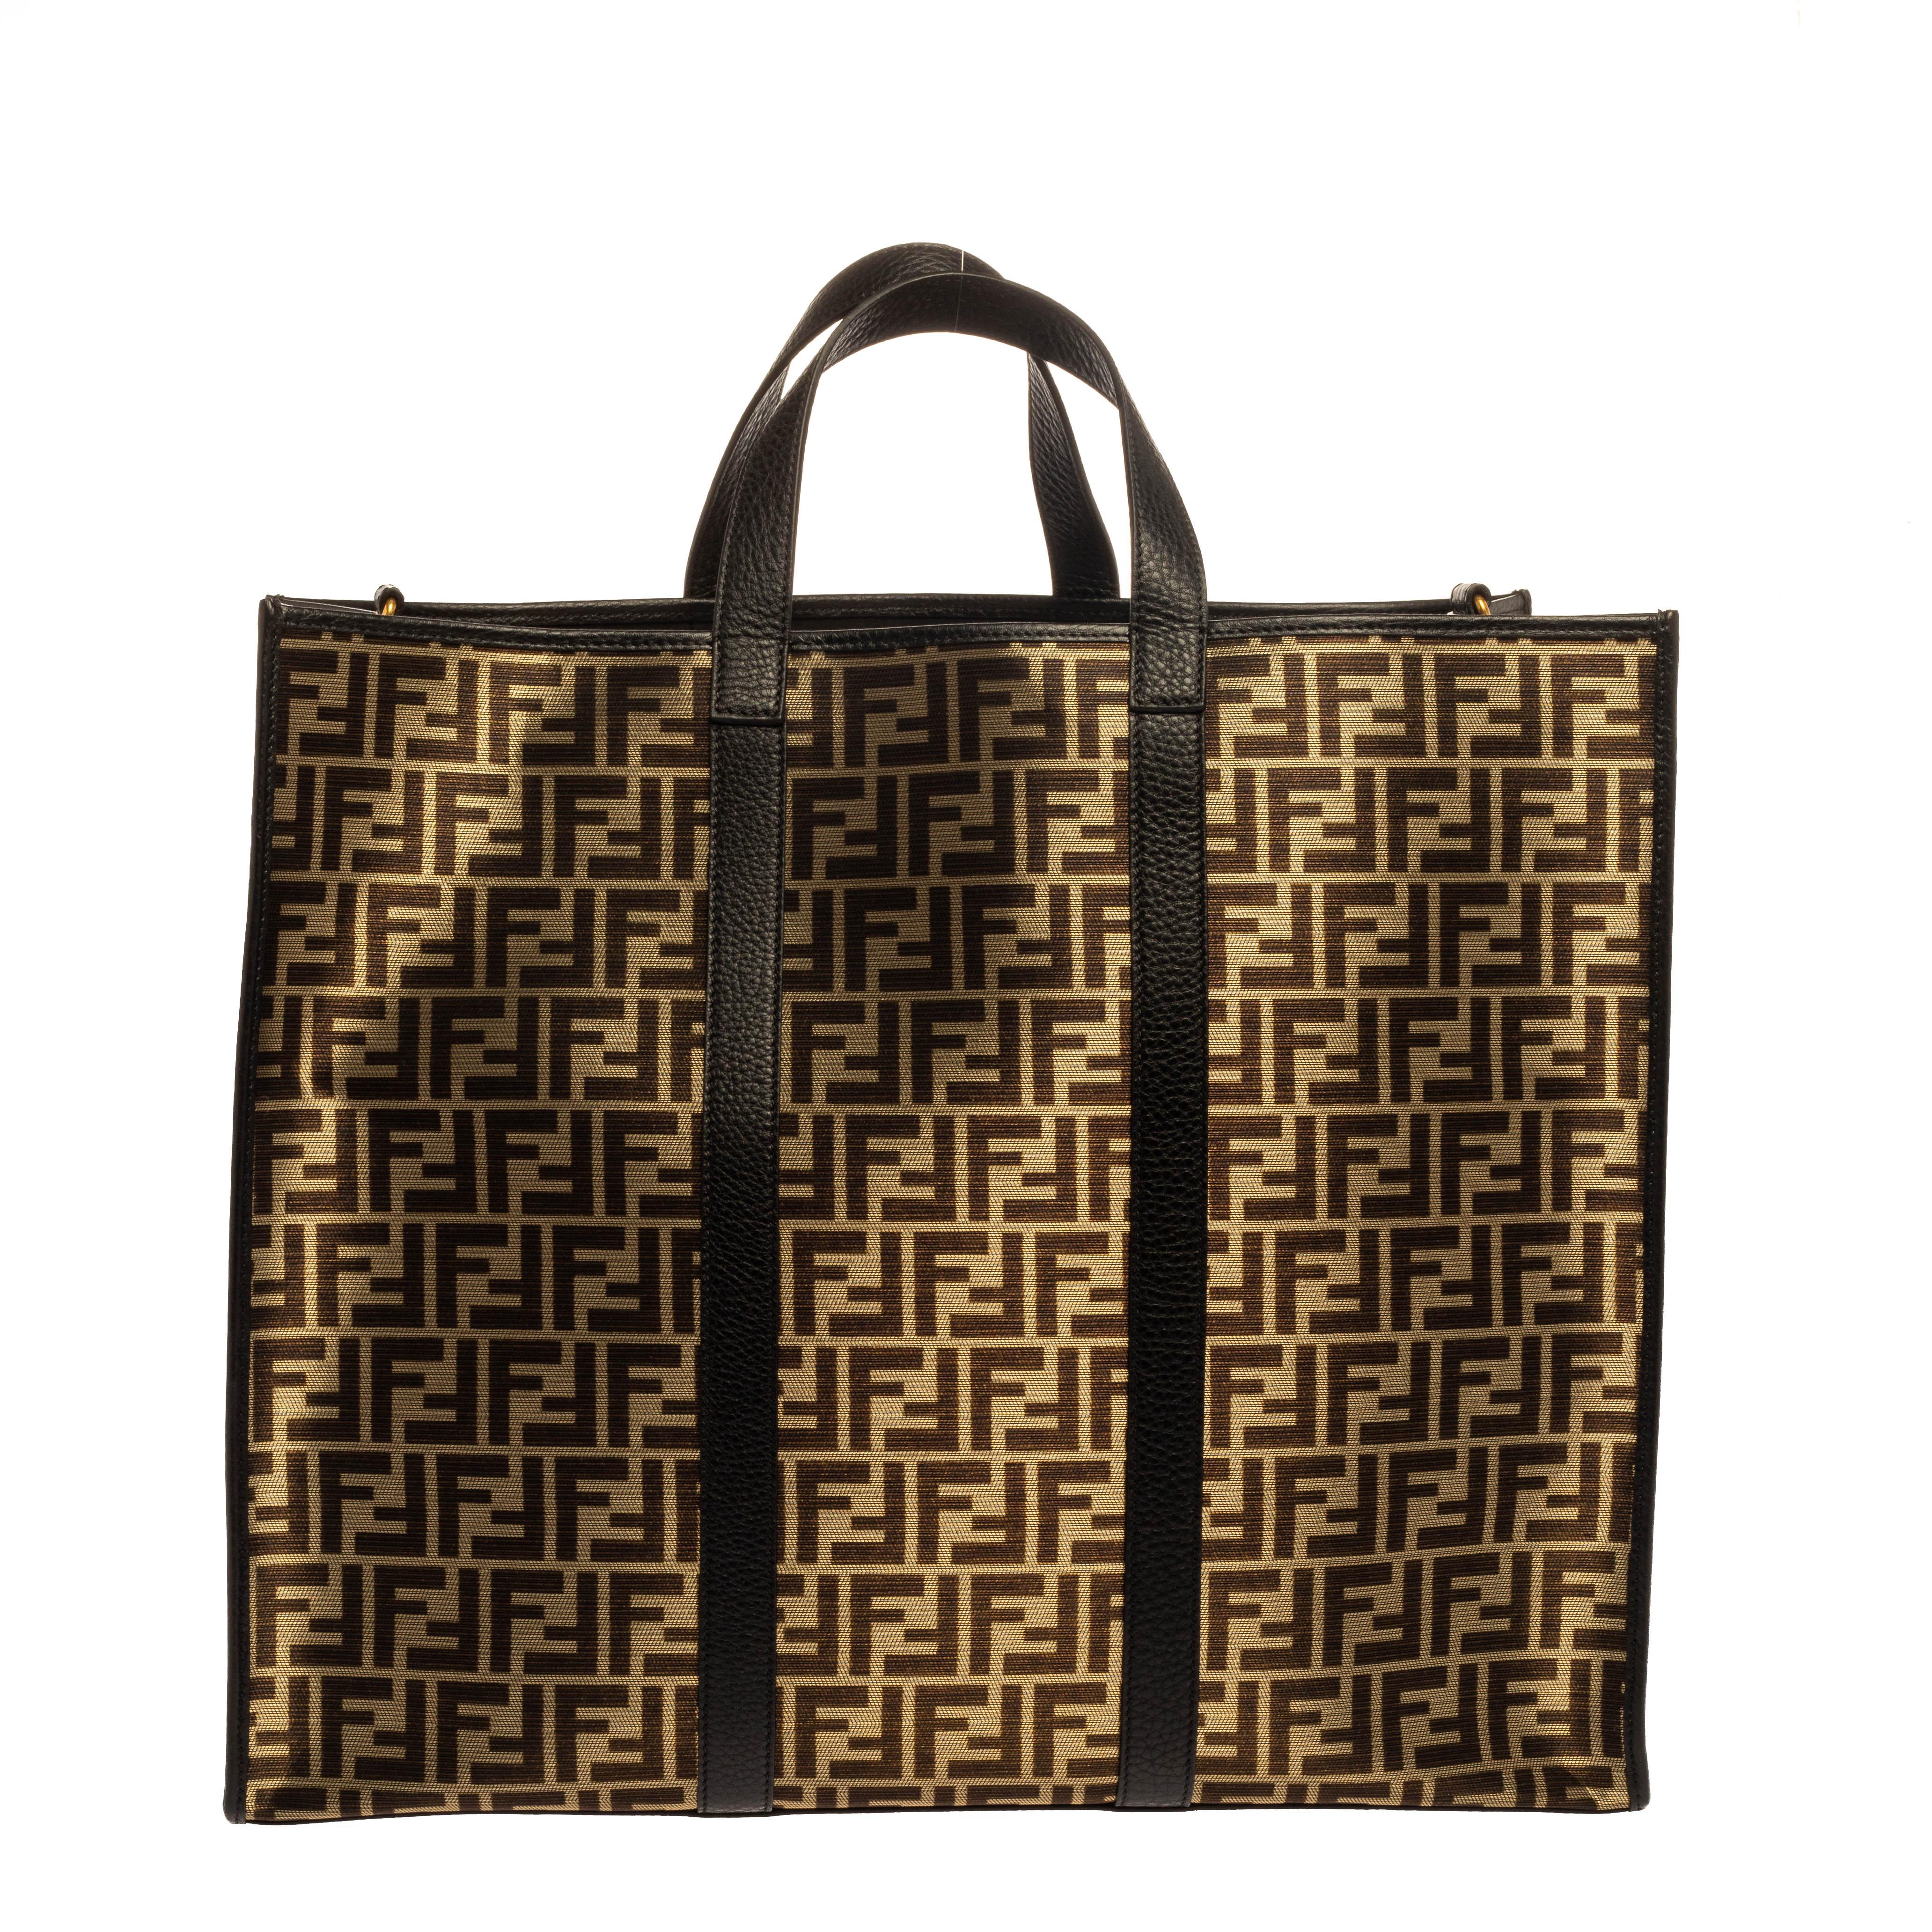 This stunning Karligrphy tote is equal parts functional and stylish. It has been crafted meticulously in Italy and made from Zucca jacquard fabric and leather. It comes in a lovely shade of black and is perfect for a host of occasions. It has dual